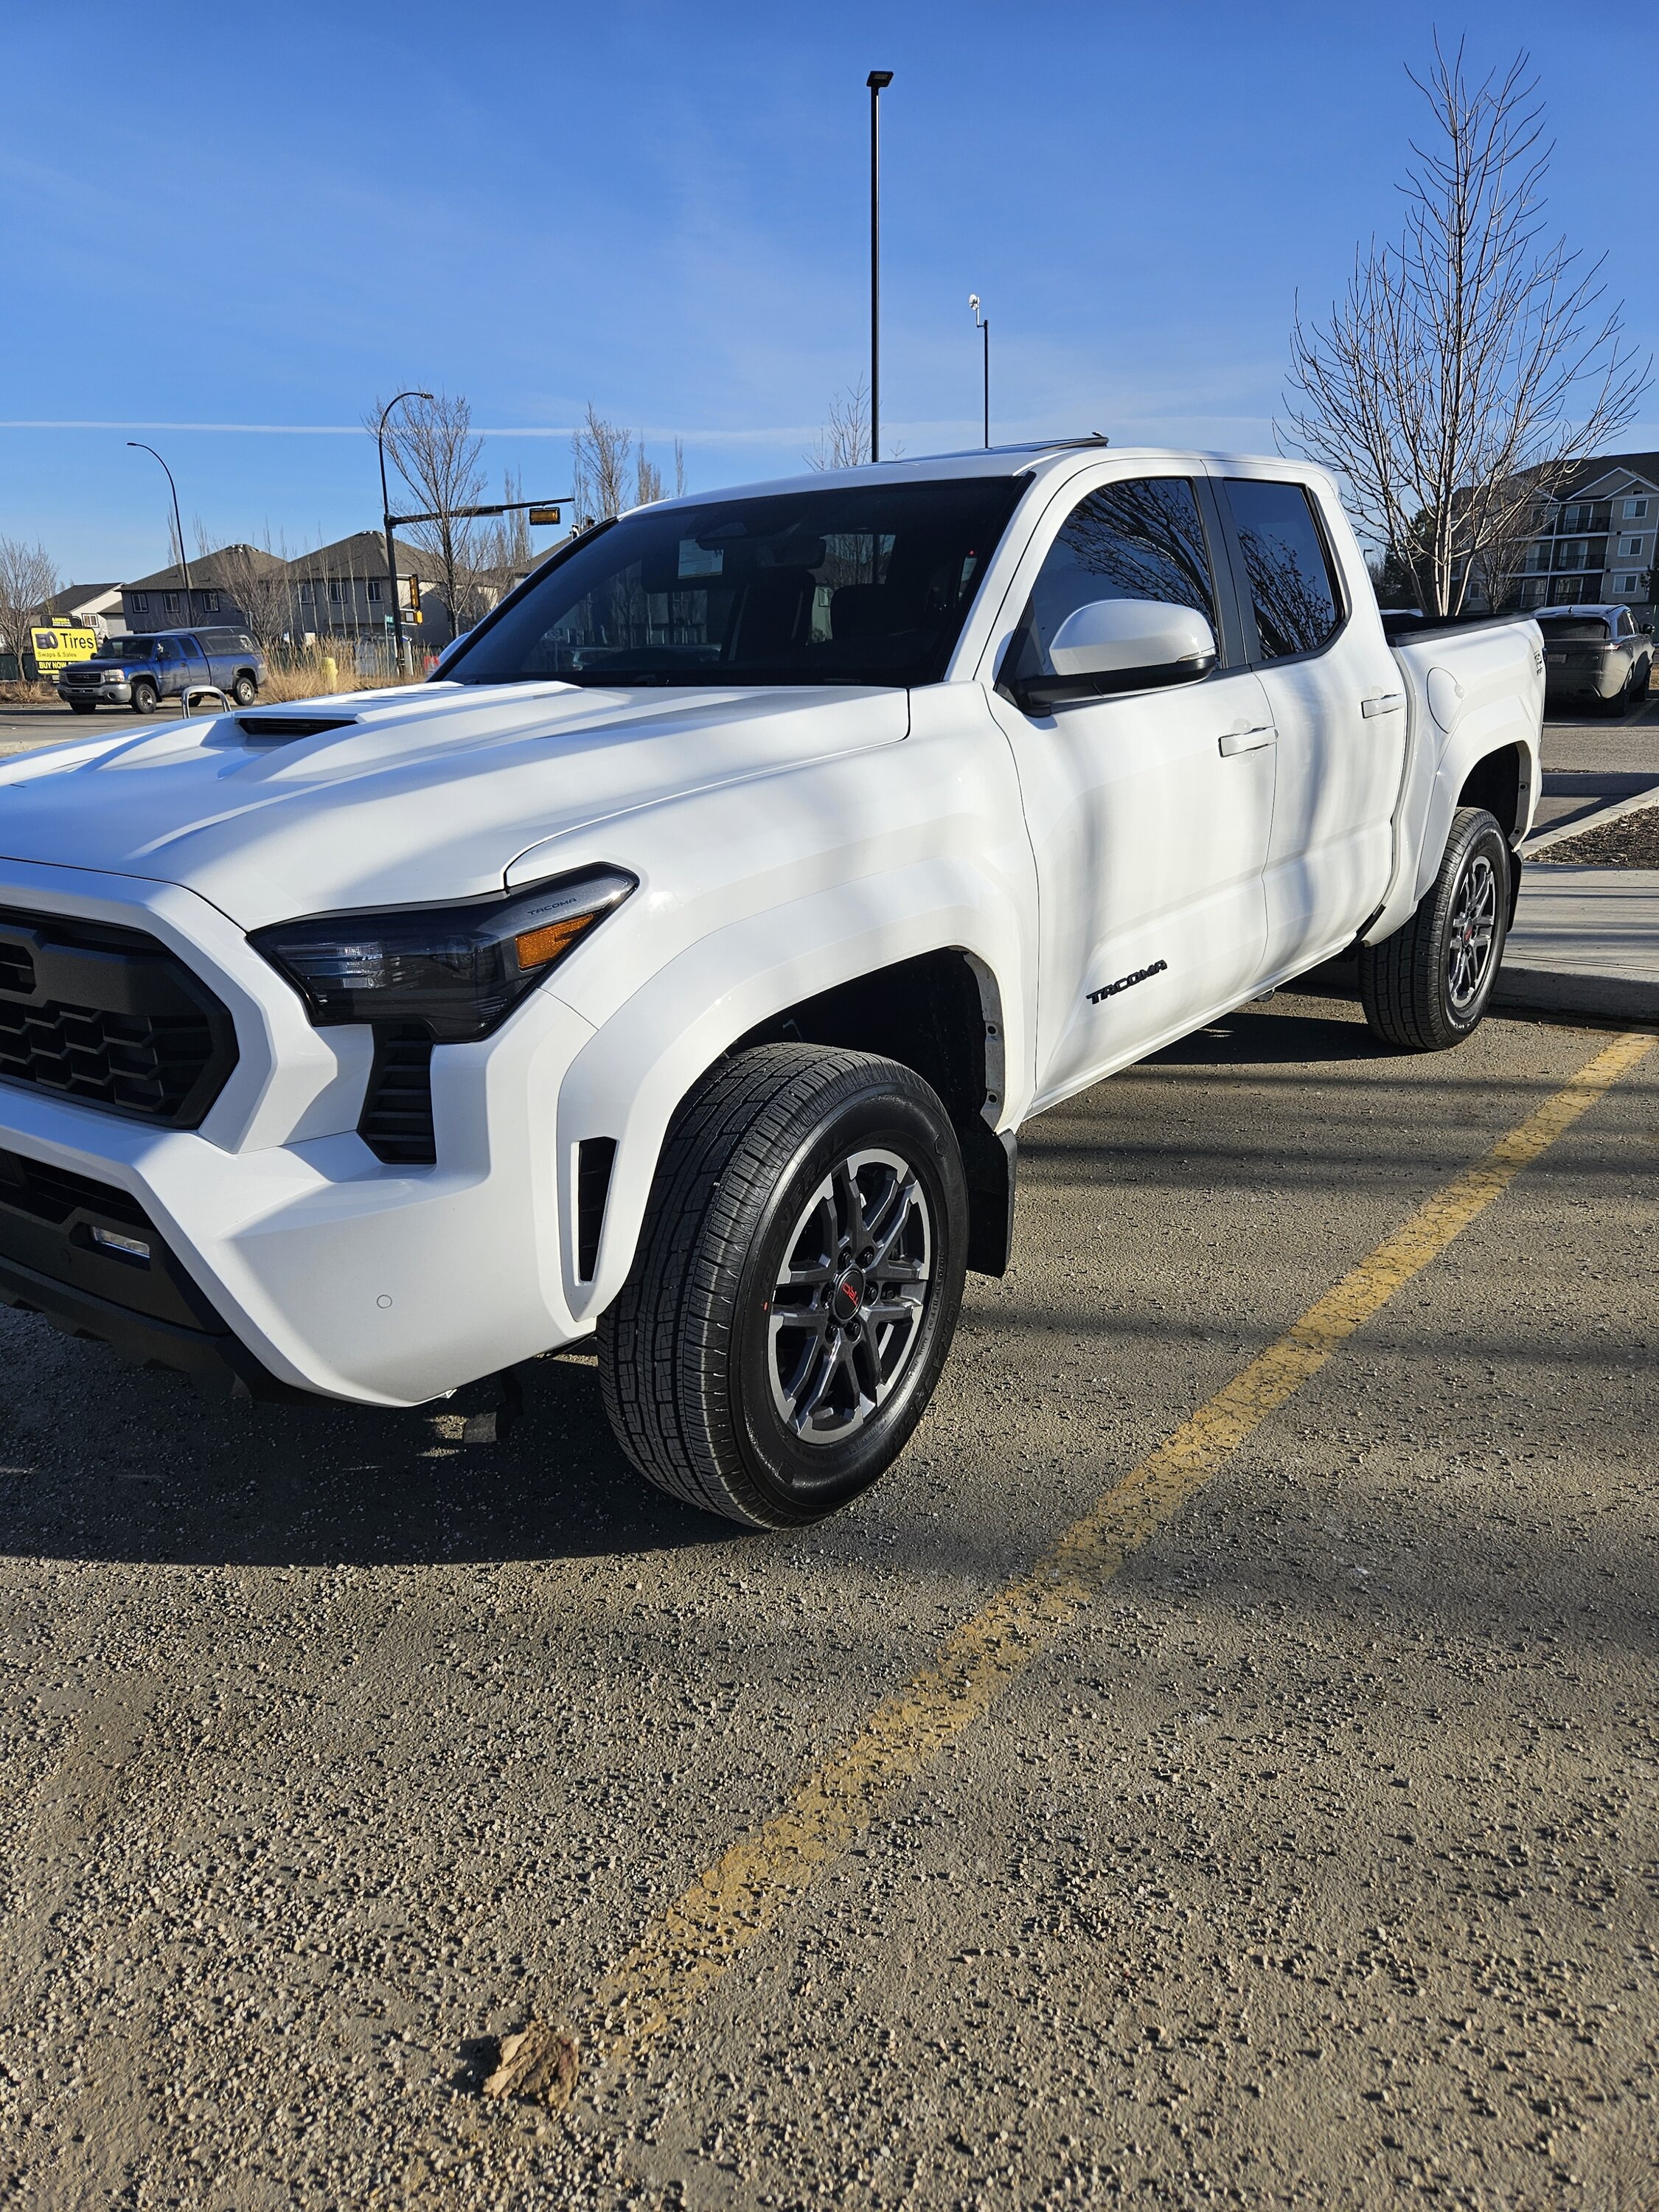 2024 Tacoma 20% Ceramic Tint on front windows to match factory rear window tints 1000003377